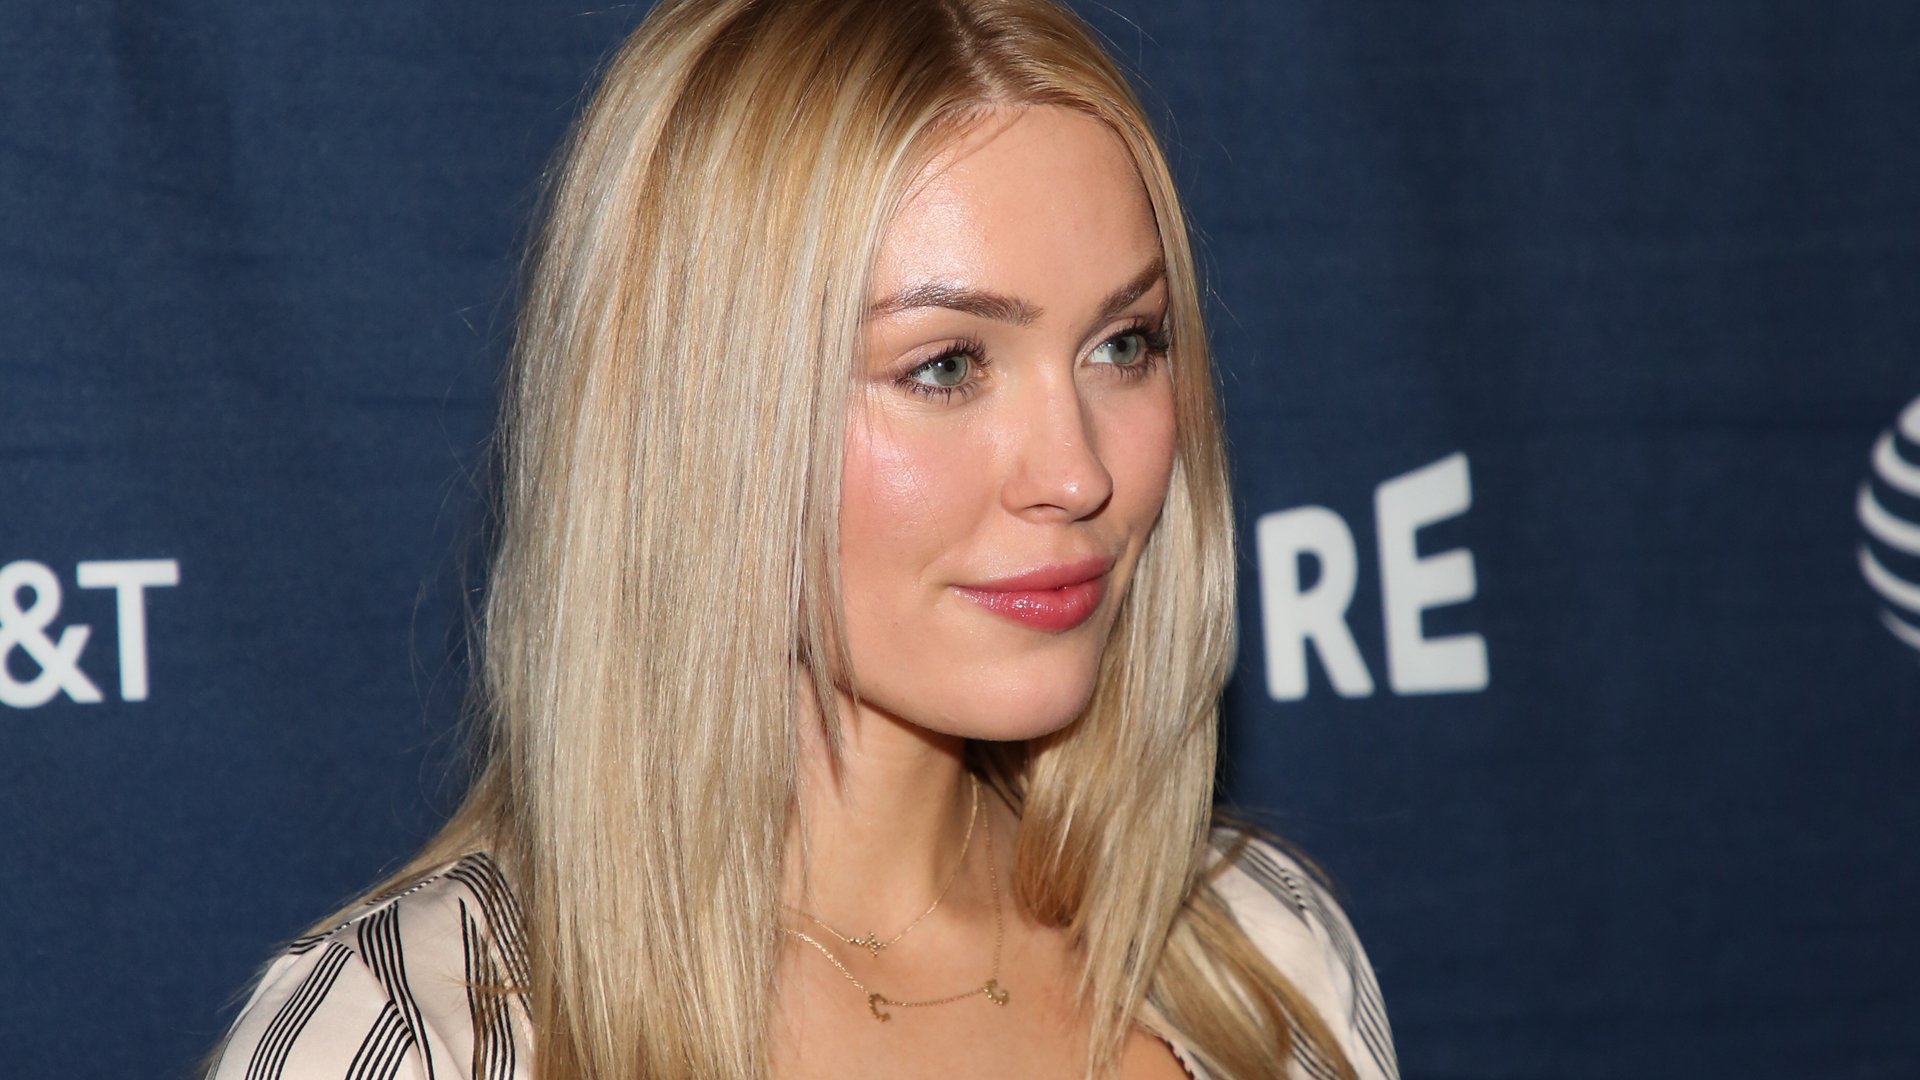 The Bachelor star Cassie Randolph attends the Vulture Festival Los Angeles 2019 - Day 1 at Hollywood Roosevelt Hotel on November 09, 2019 in Hollywood, California.